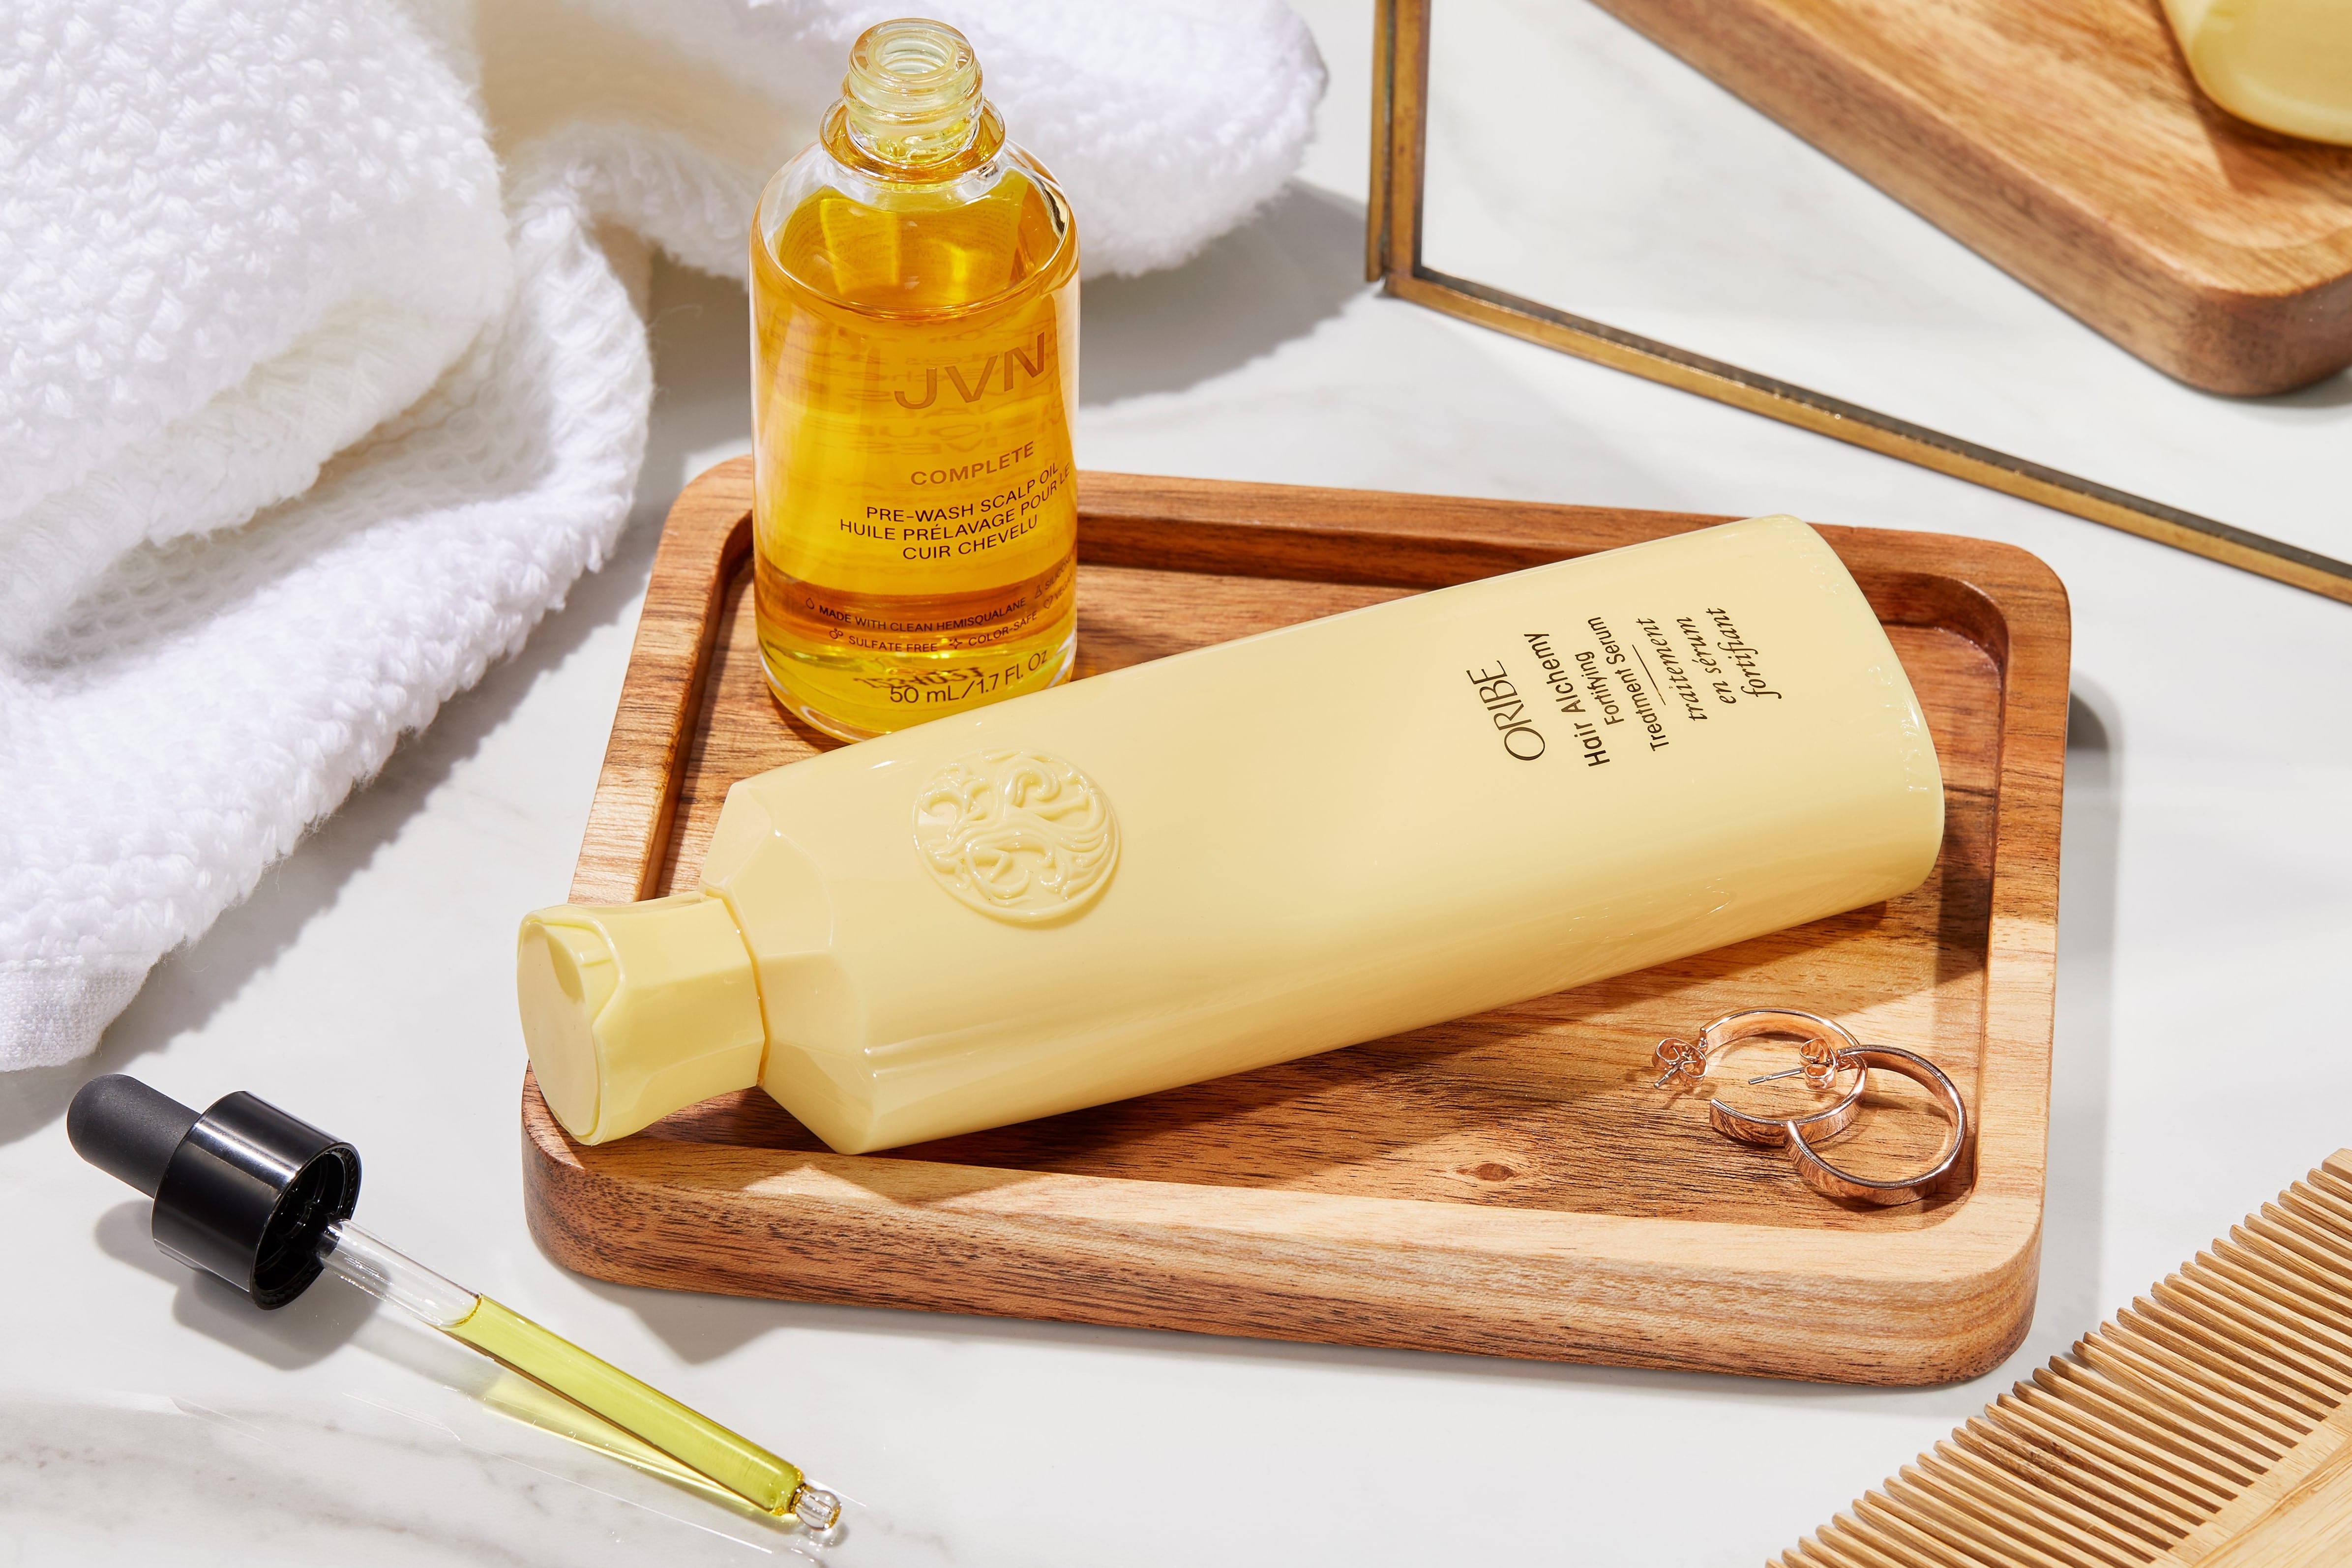 The Skinification of Hair | JVN Scalp Oil and Oribe Hair Alchemy Fortifying Treatment | Space NK